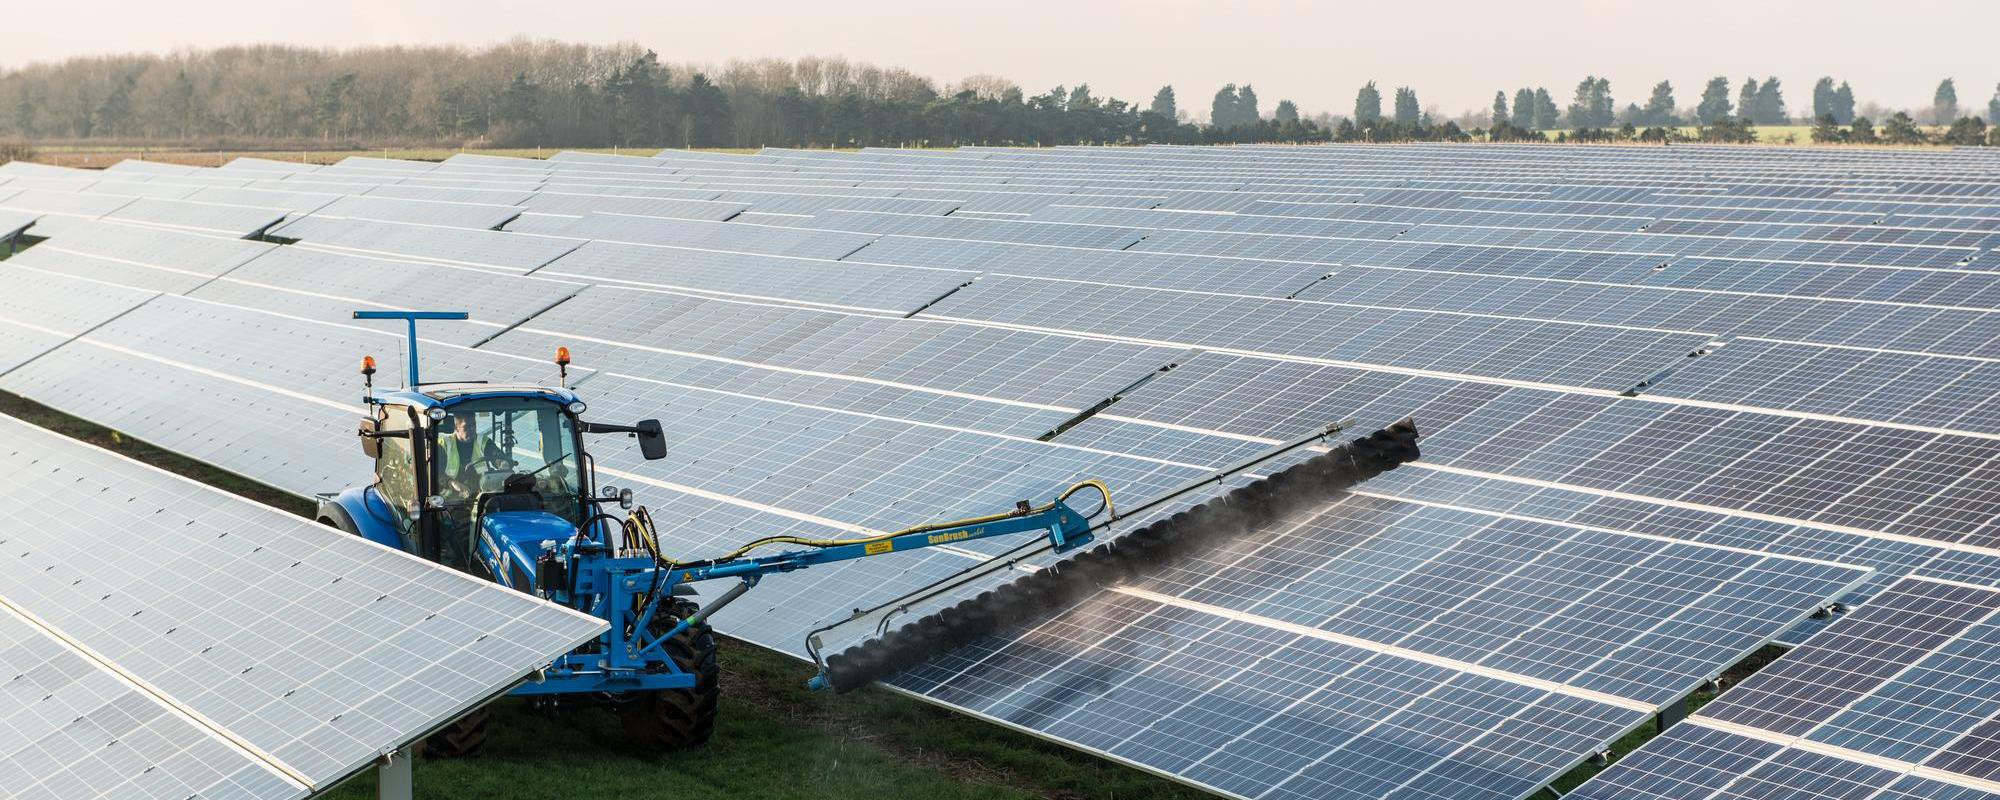 tractor cleaning solar panels